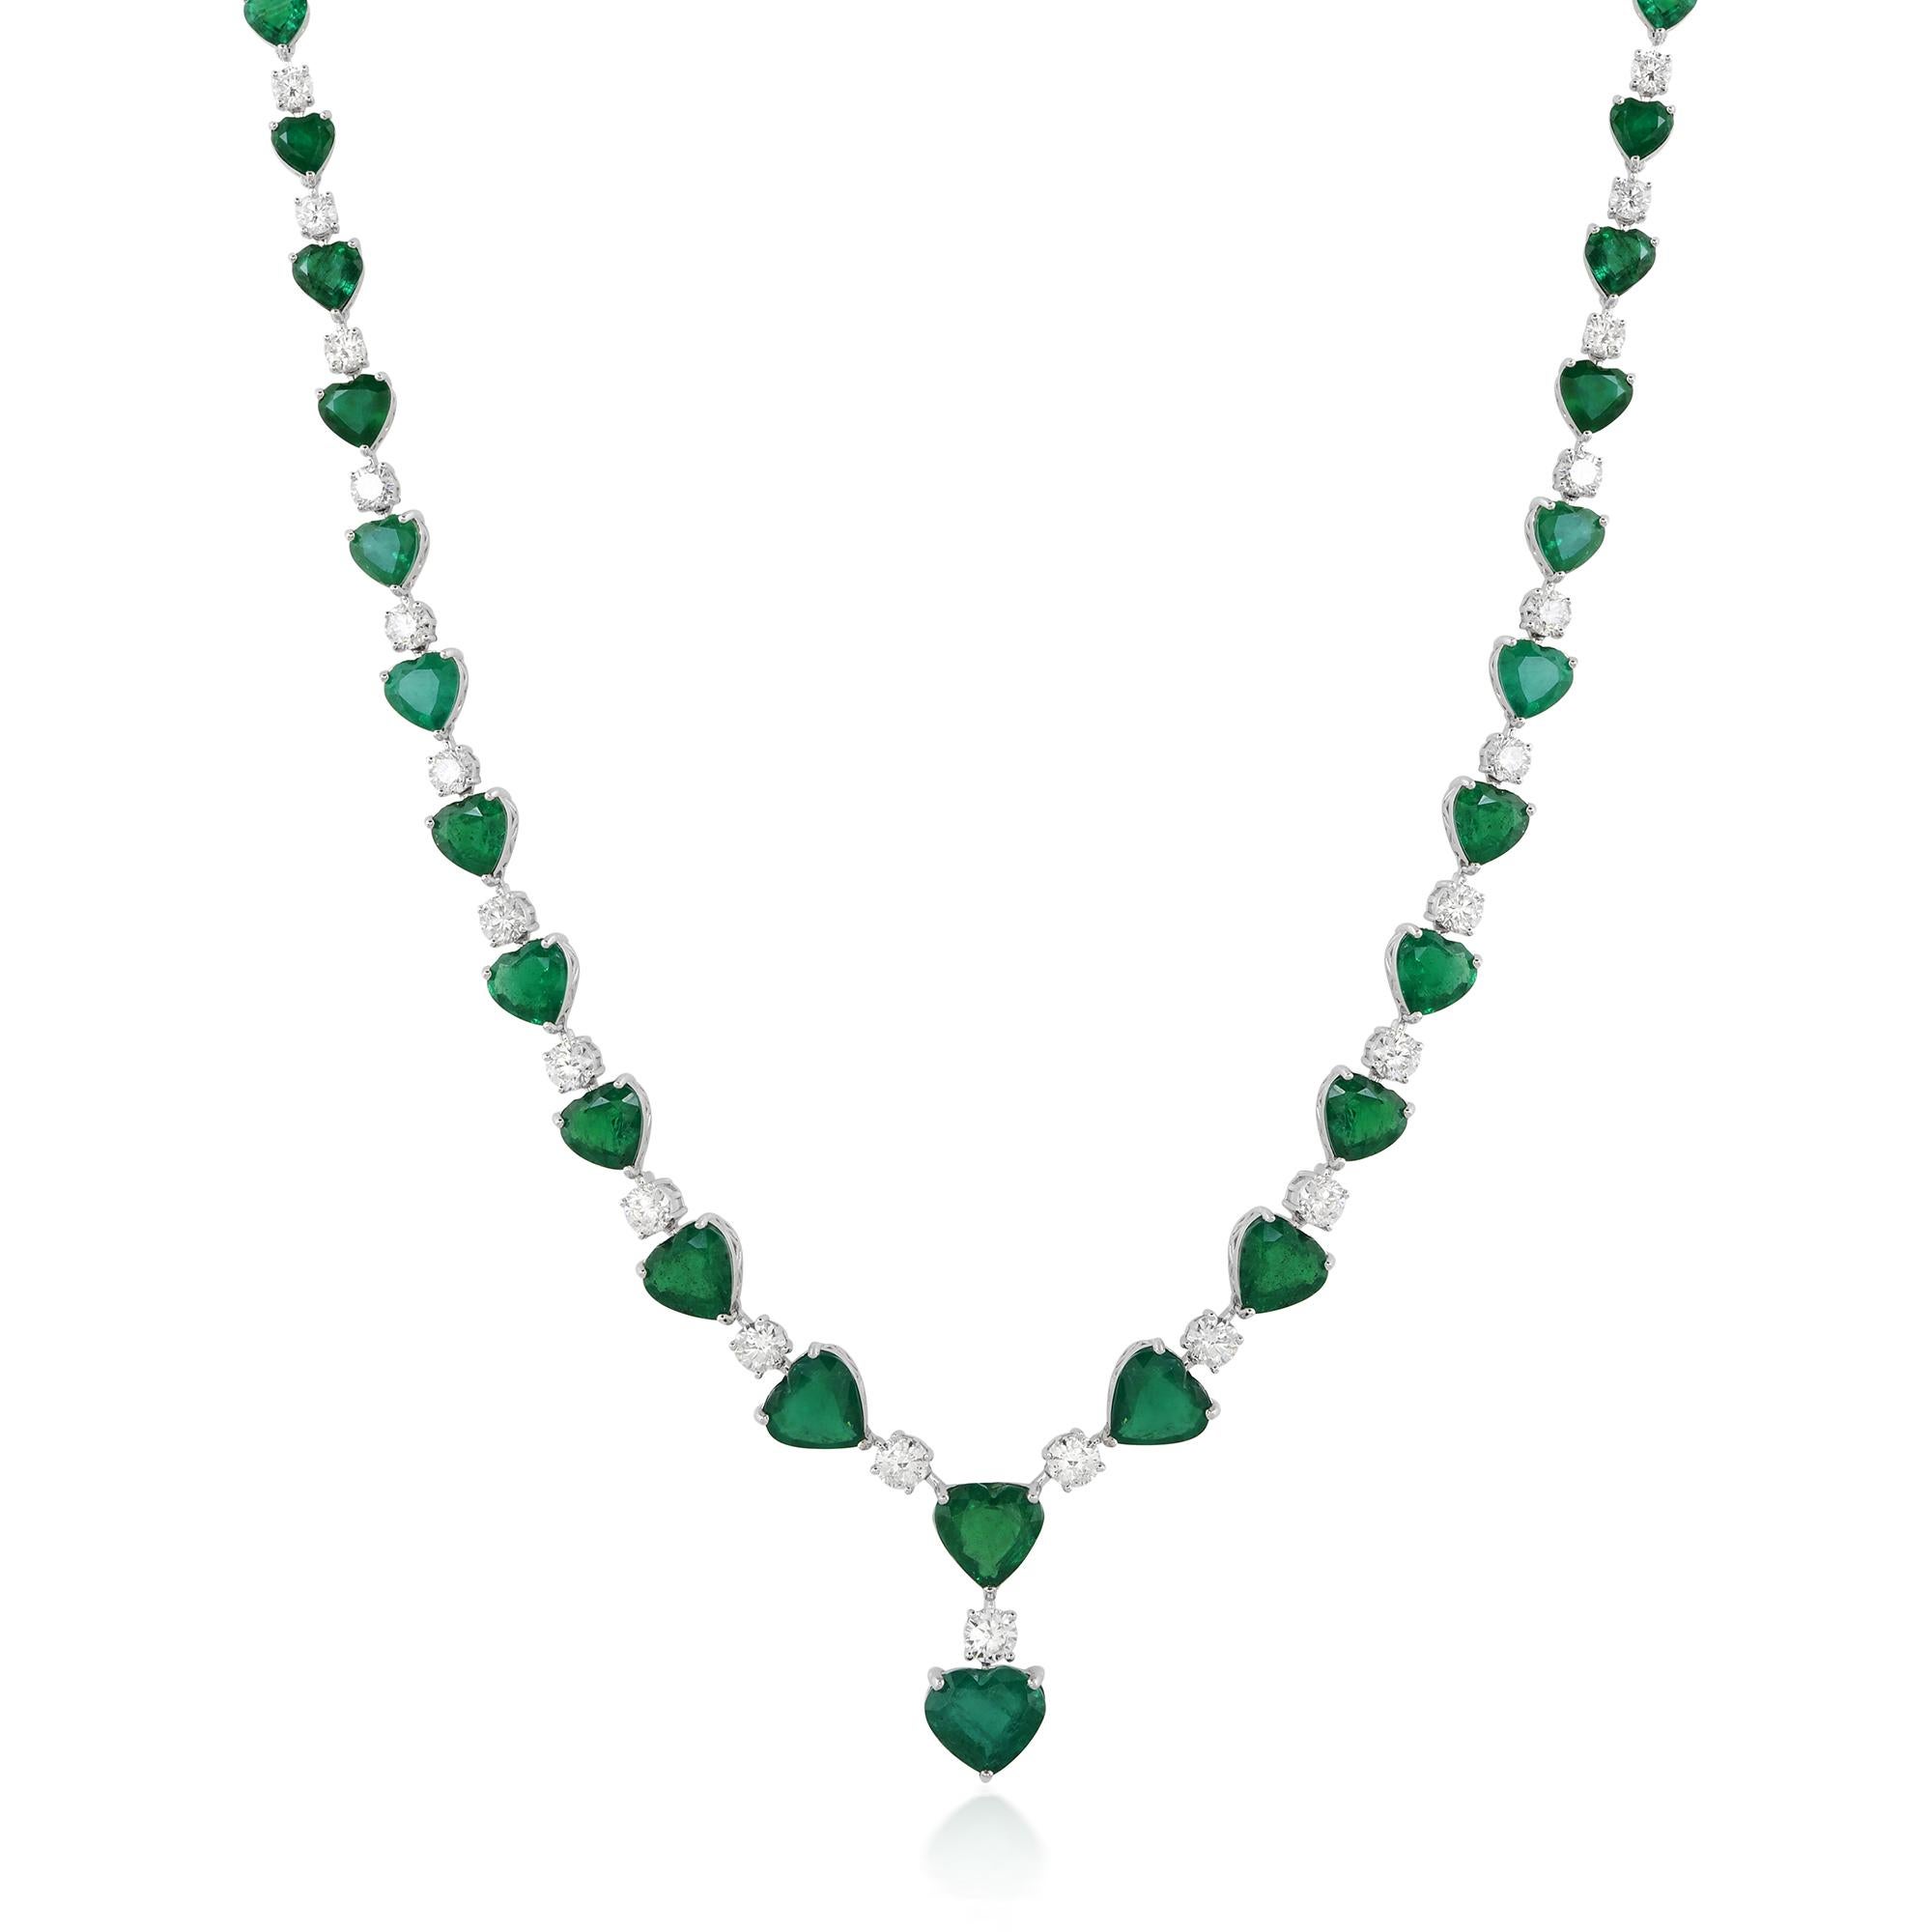 Indulge in the mesmerizing allure of this exquisite Heart Zambian Emerald Gemstone Necklace, a true testament to elegance and sophistication. Crafted with the utmost precision and artistry, this necklace is a stunning example of fine jewelry at its